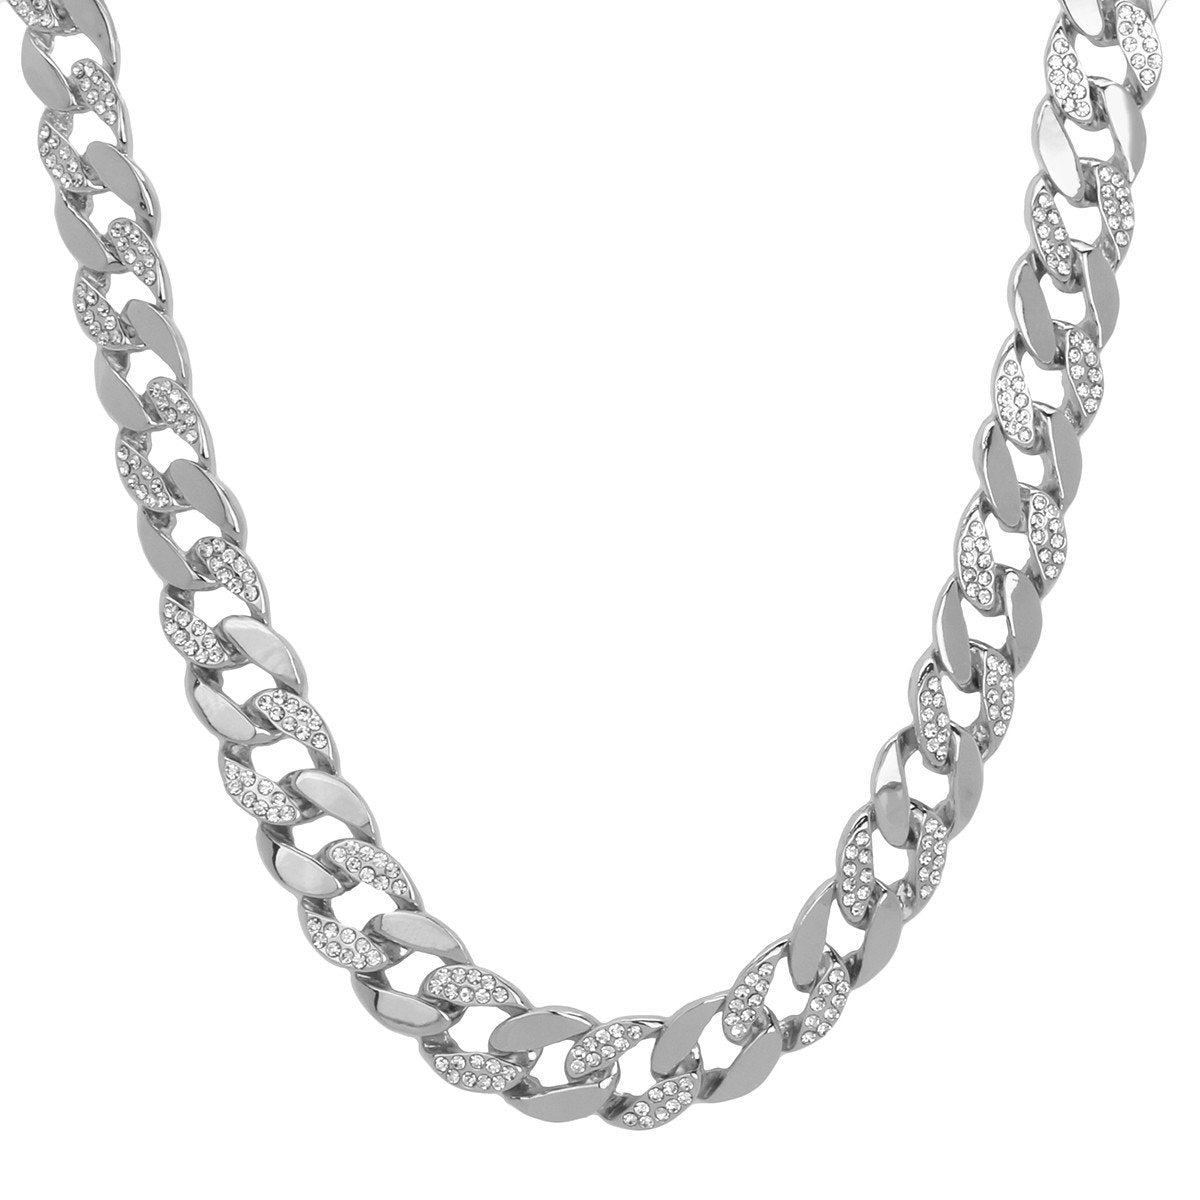 Silver Plated Cuban Half Cz Chain Necklace 15mm 30" Inches